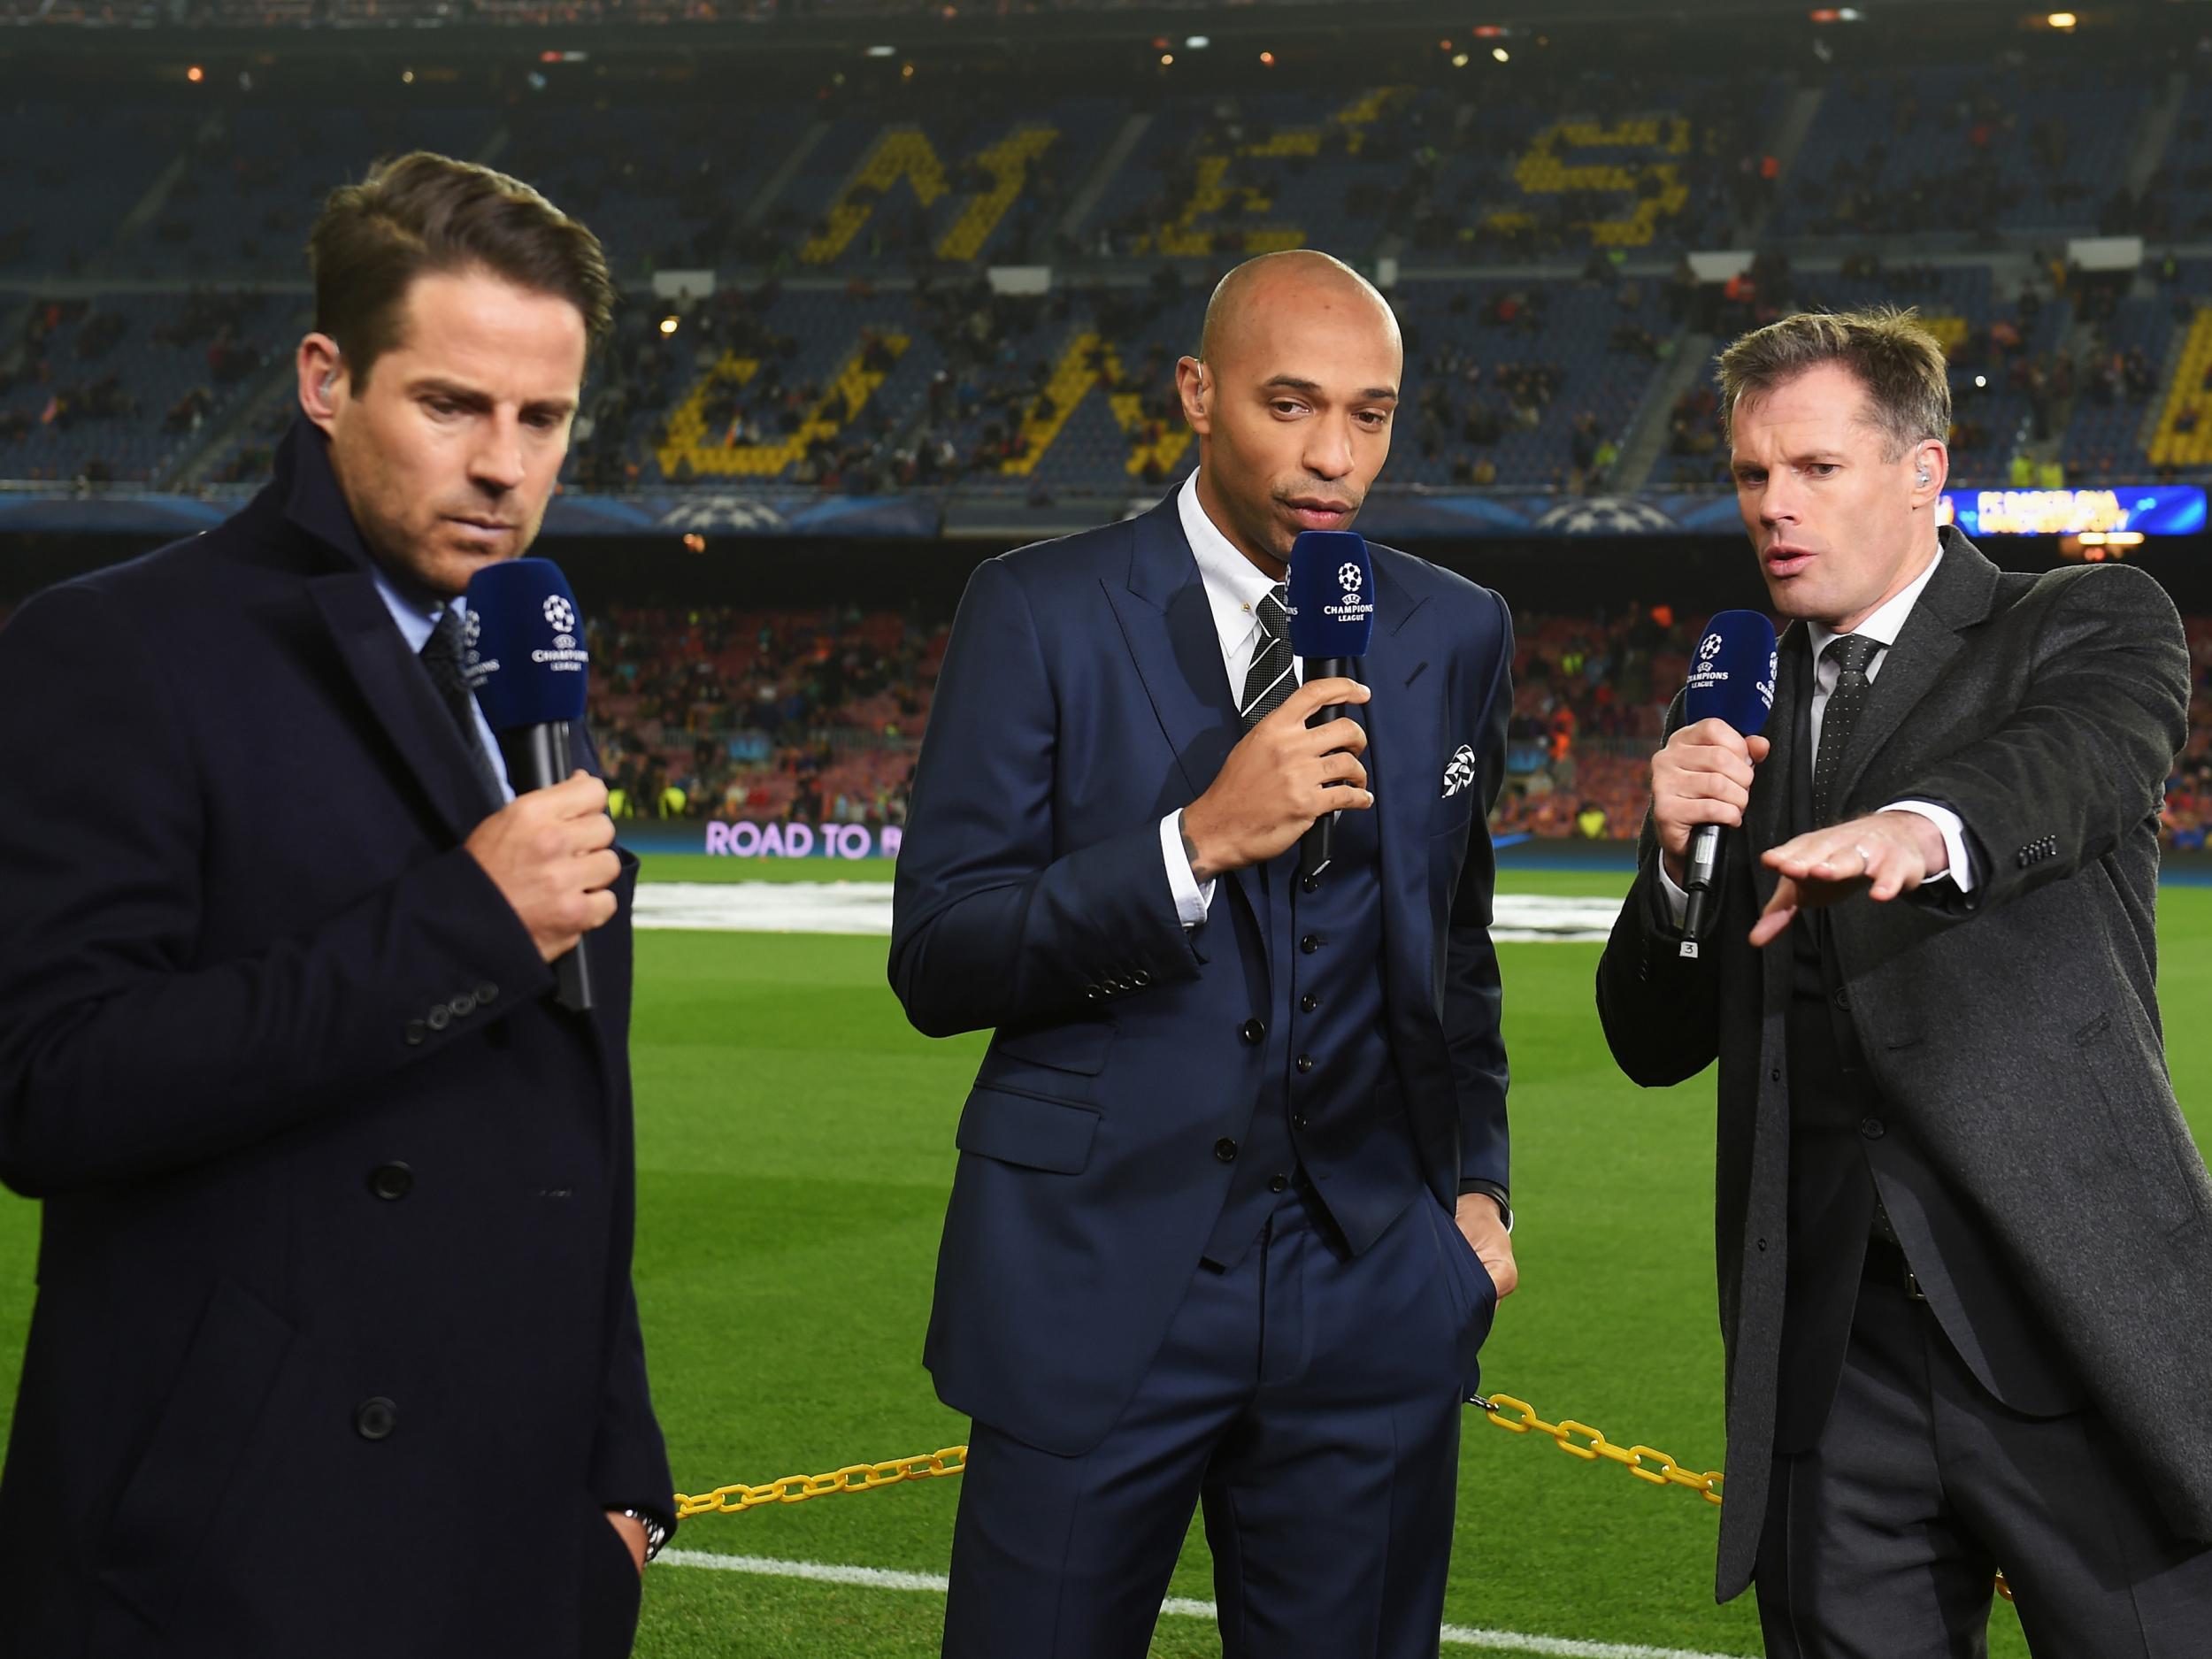 Sky Sports pair Jamie Redknapp and Jamie Carragher flank Thierry Henry